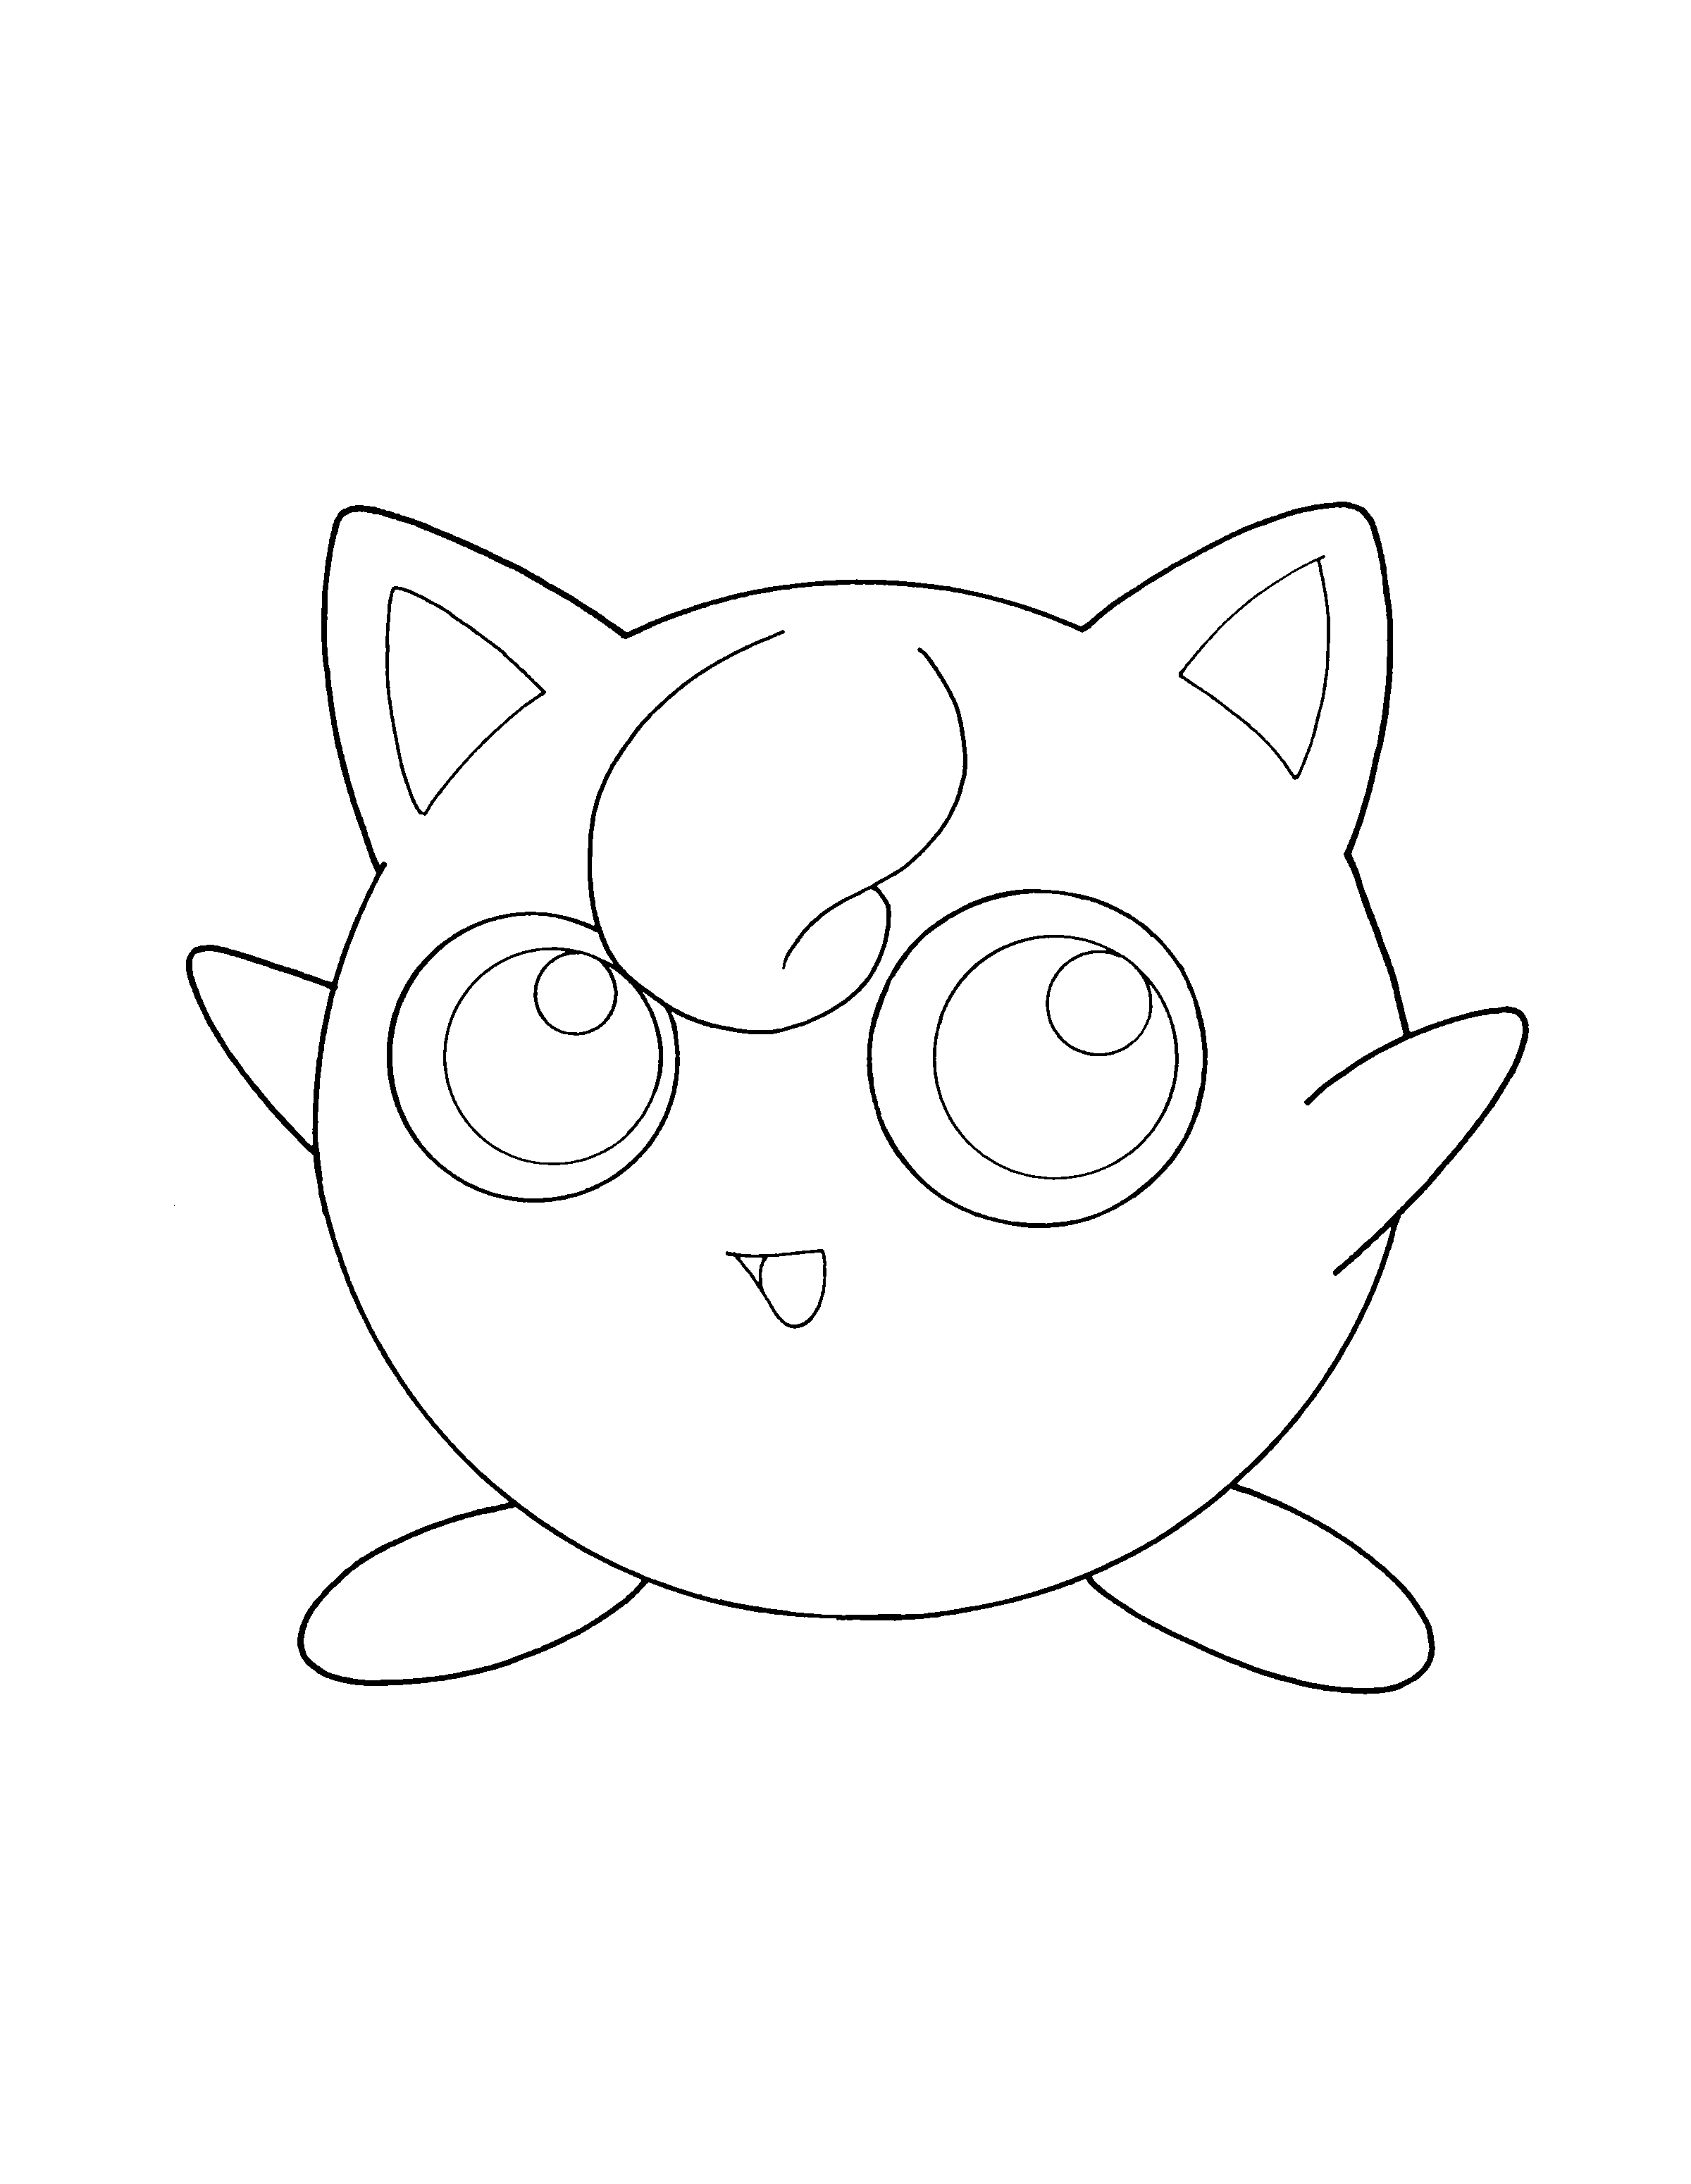 animated-coloring-pages-pokemon-image-0730